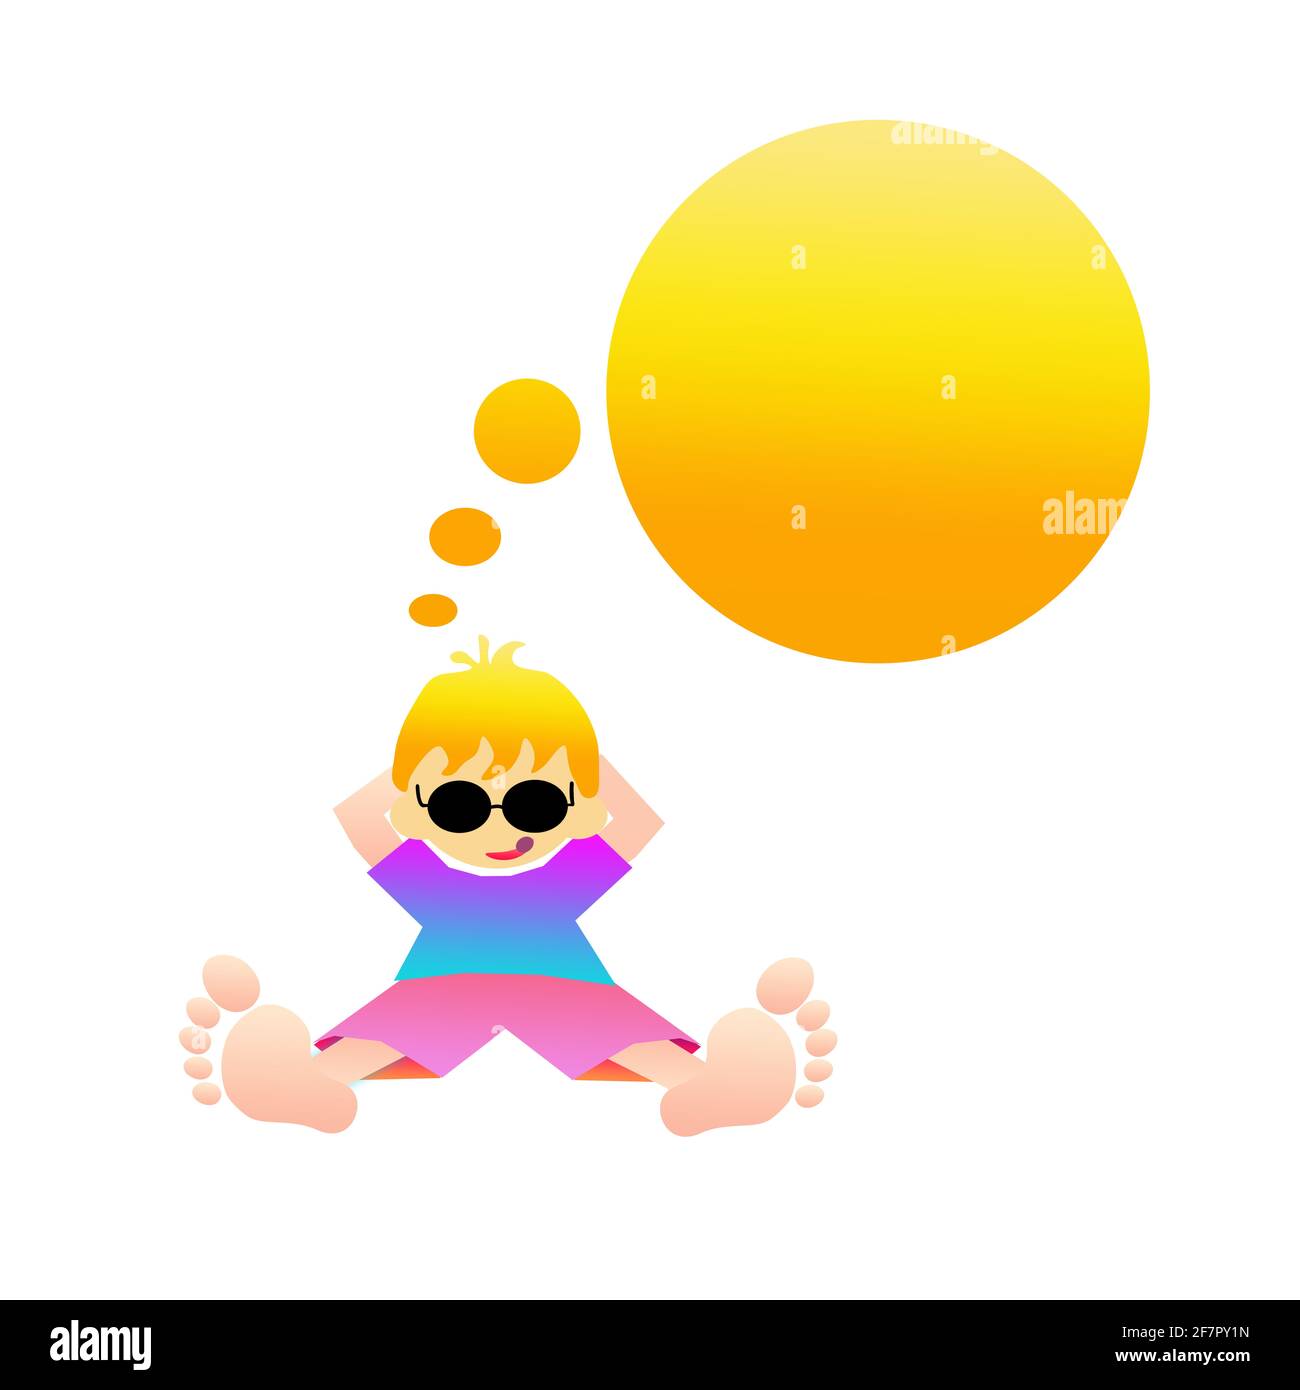 Vacation, summer, sun, travel, barefoot on the lounger with sunglasses on your face. Thoughts wander, a thought bubble above your head. Stock Photo